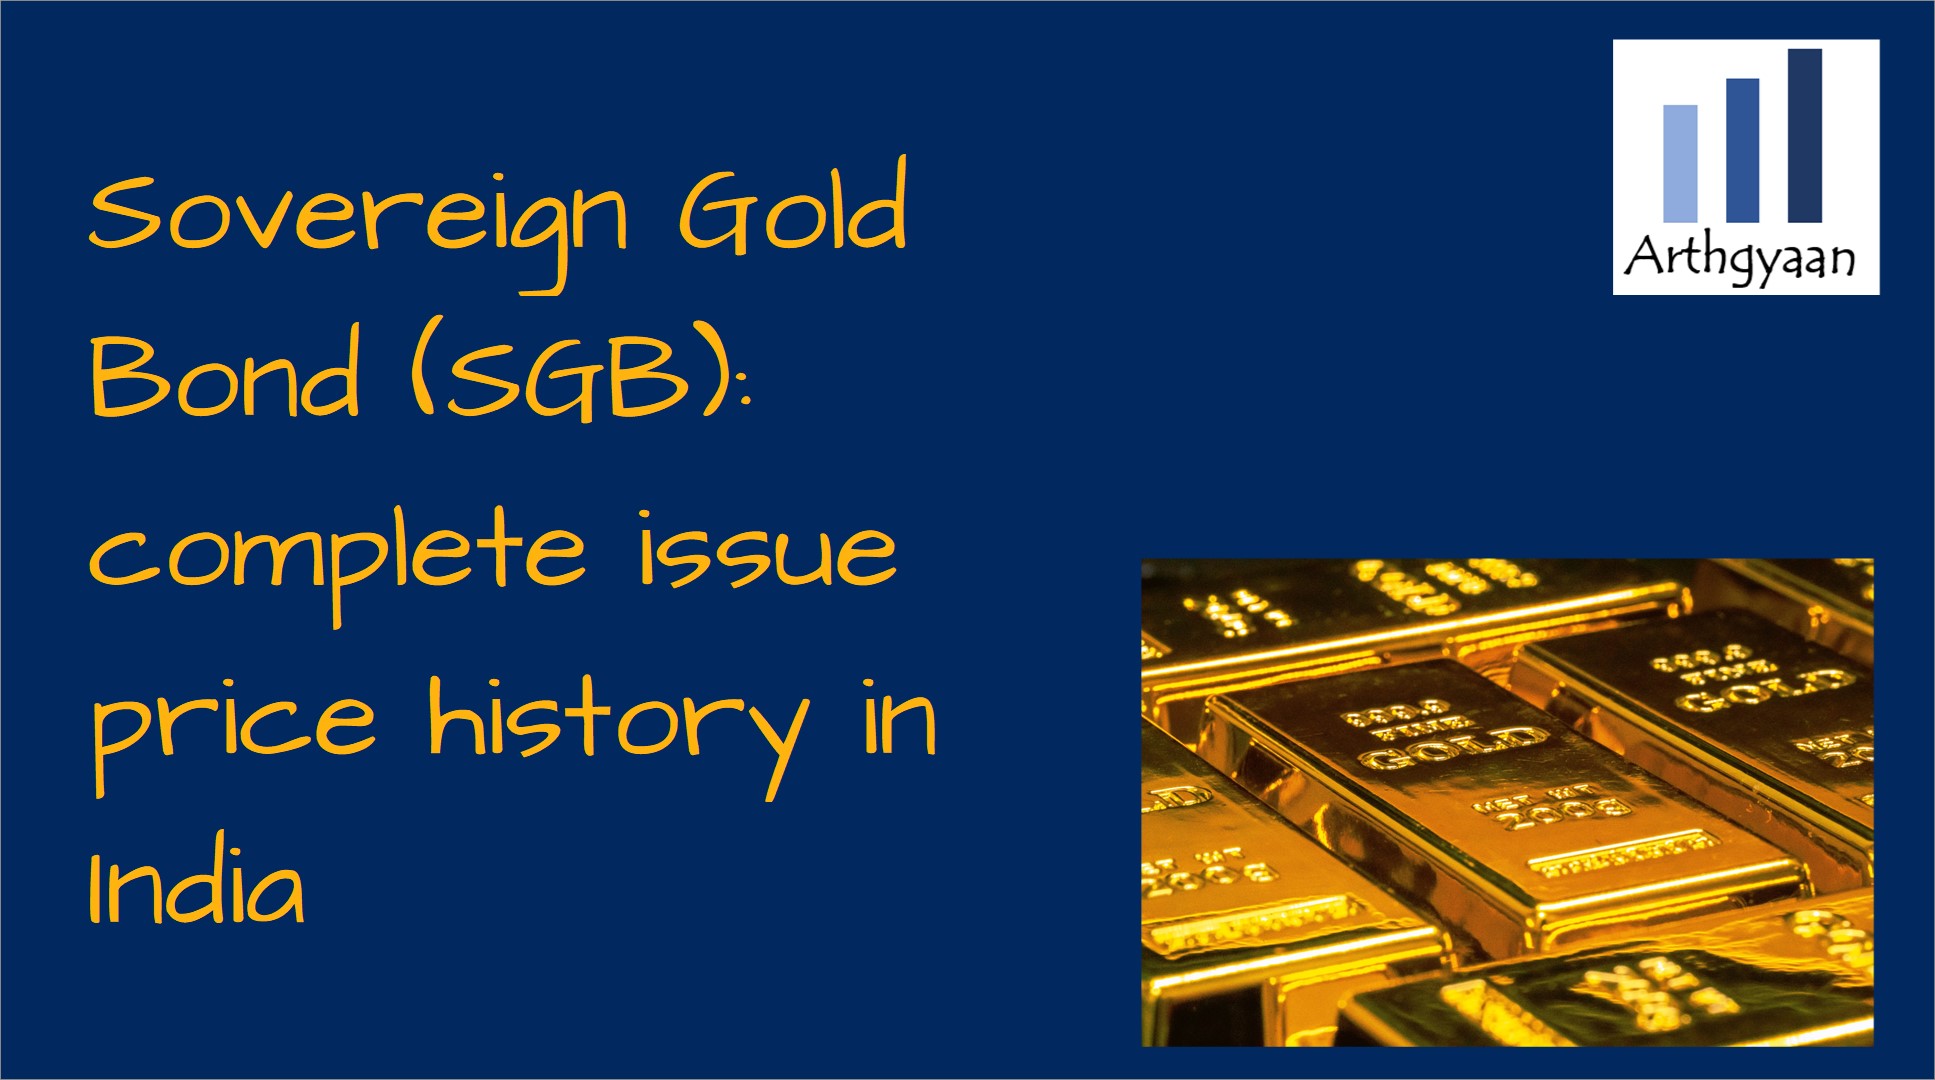 <p>This article provides a complete history of SGB issue price history since 2015 to help investors track the how the issue price has moved over time.</p>

